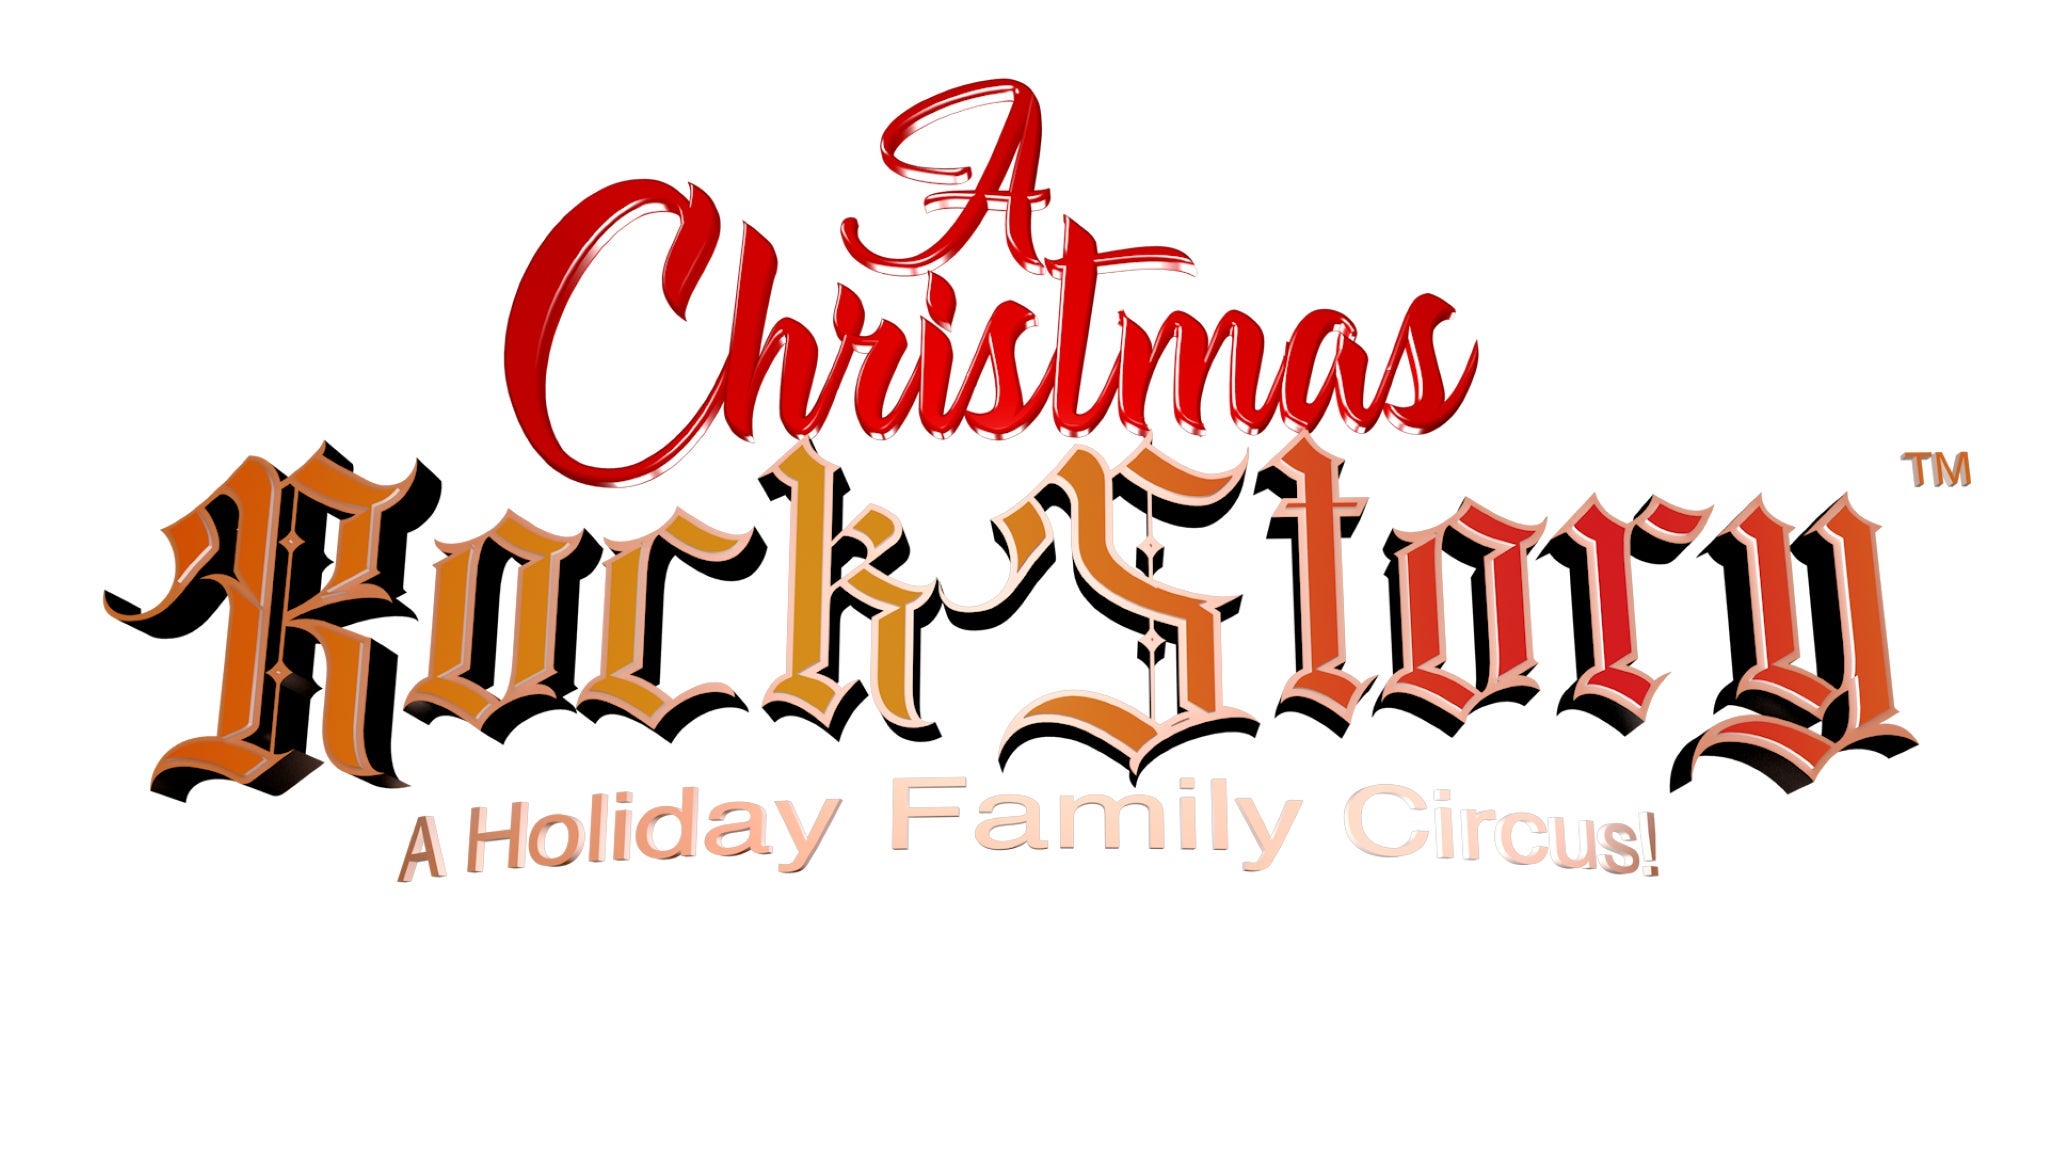 A Christmas Rock Story: A Holiday Circus Spectacular in Calgary promo photo for Promotor Pressale presale offer code